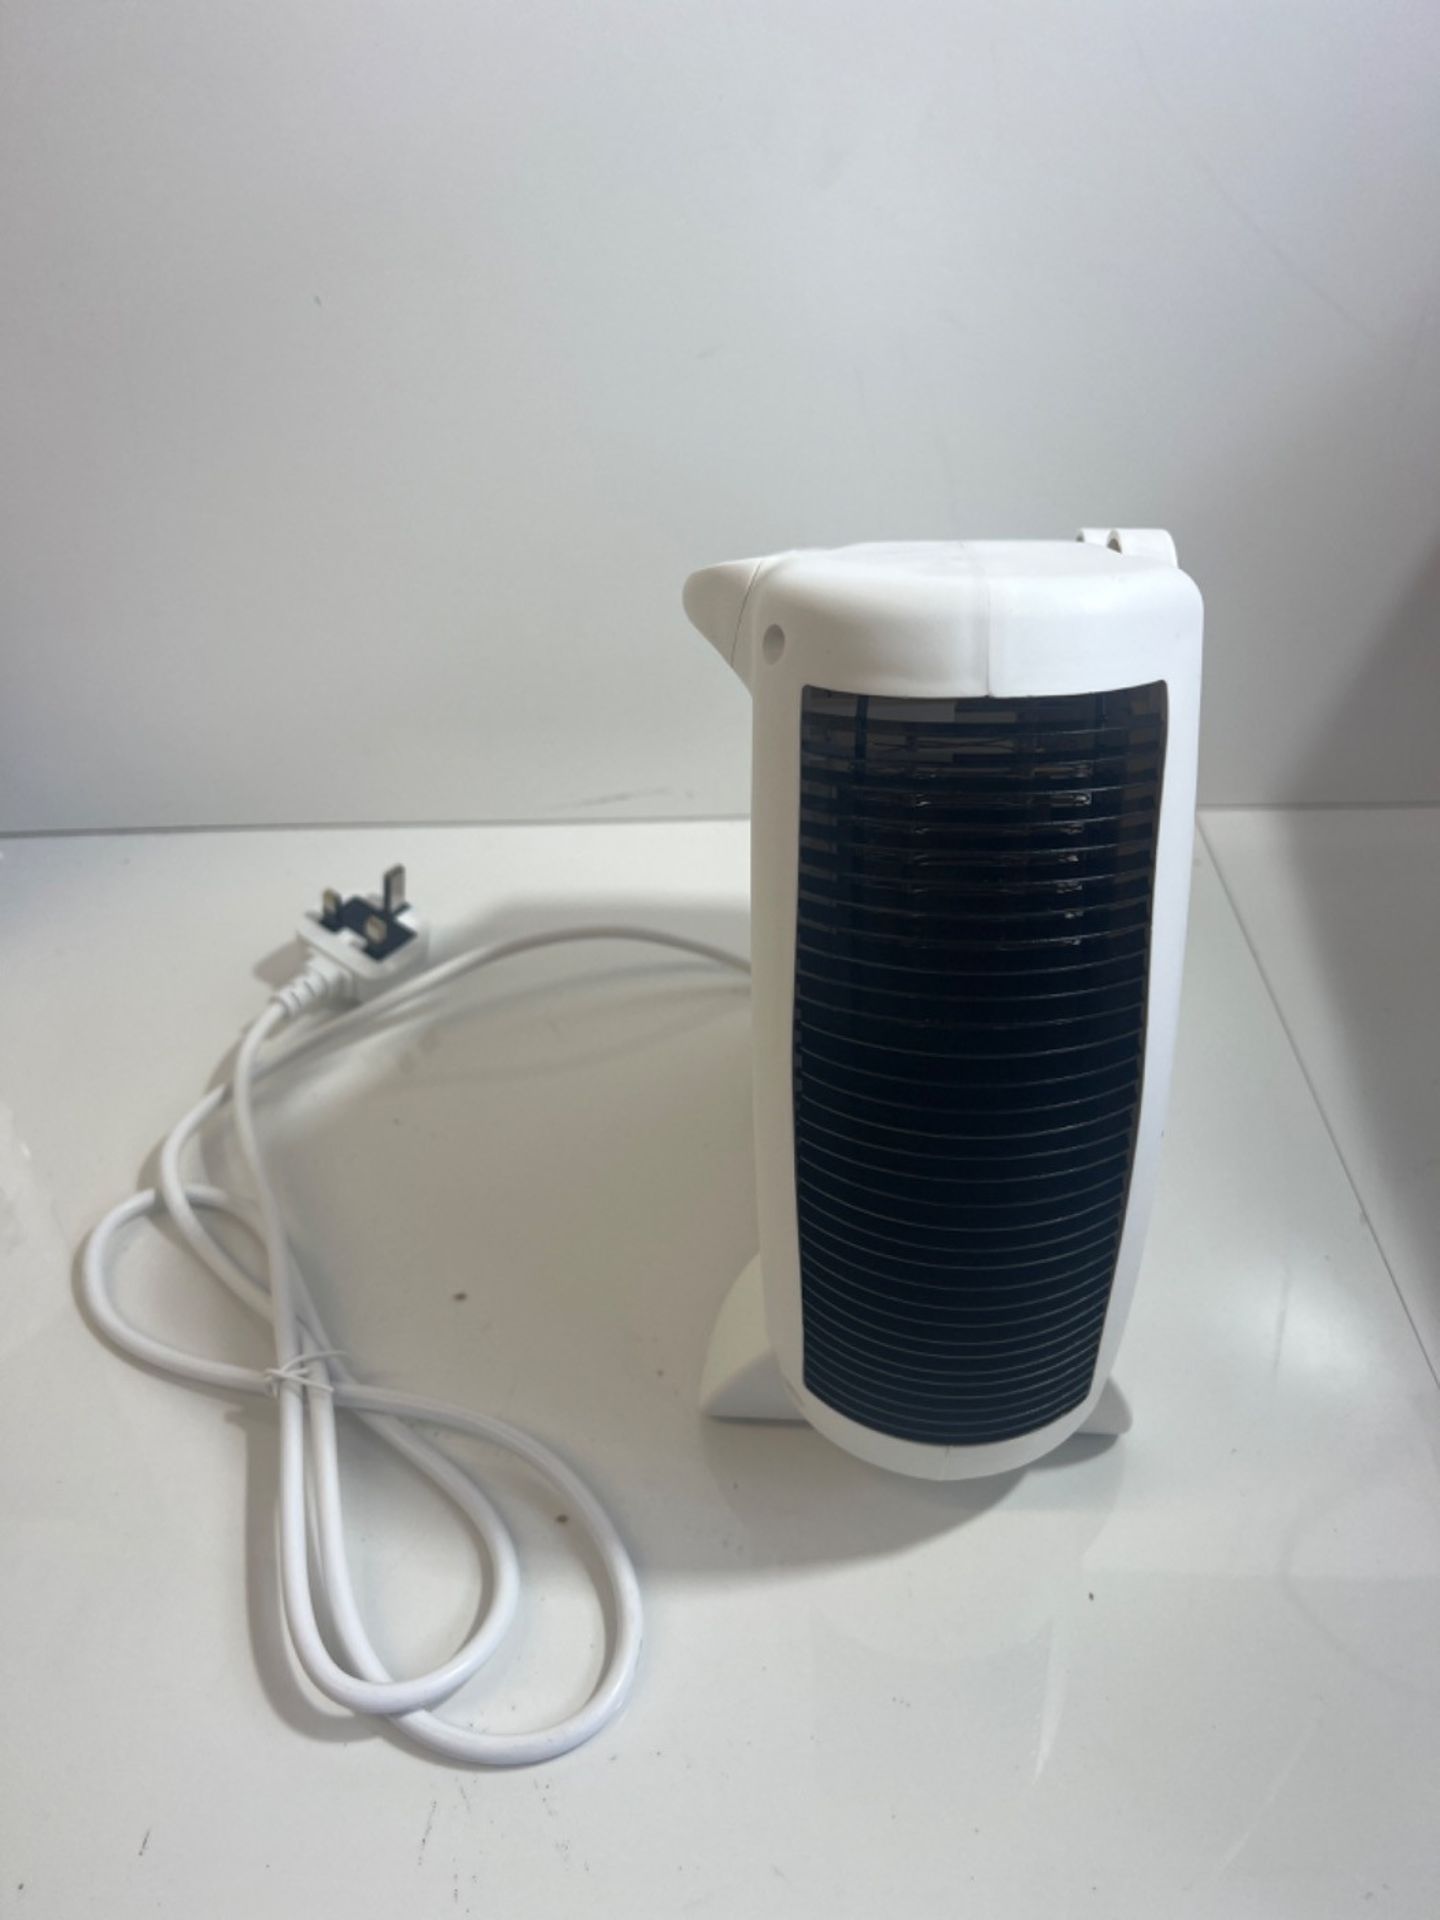 Warmlite WL44001 Thermo Fan Heater with 2 Heat Settings and Overheat Protection, 2000W, White - Image 3 of 3